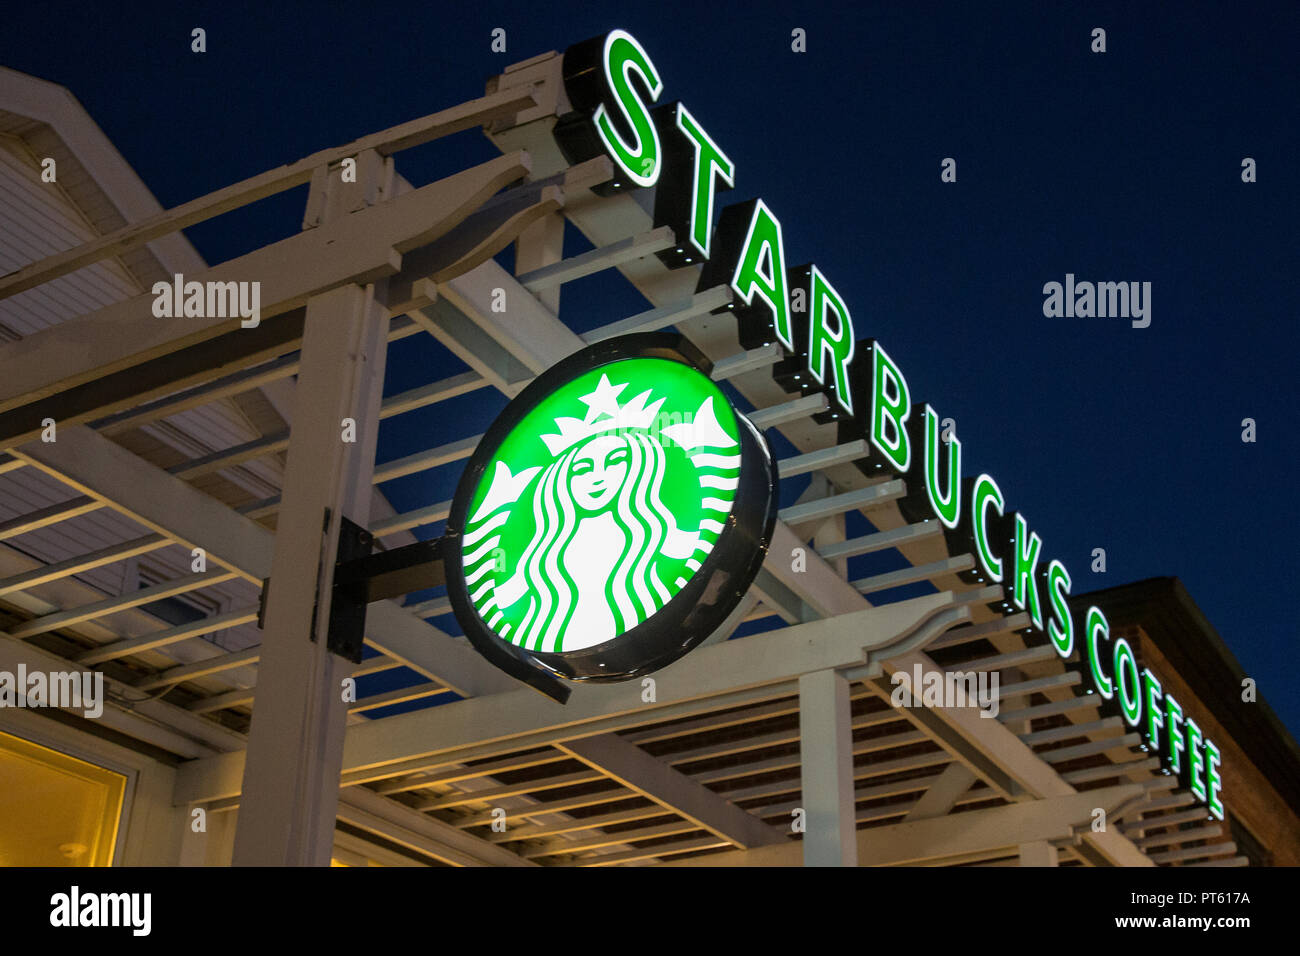 Starbuck's Sign in Amherst, MA Stockfoto